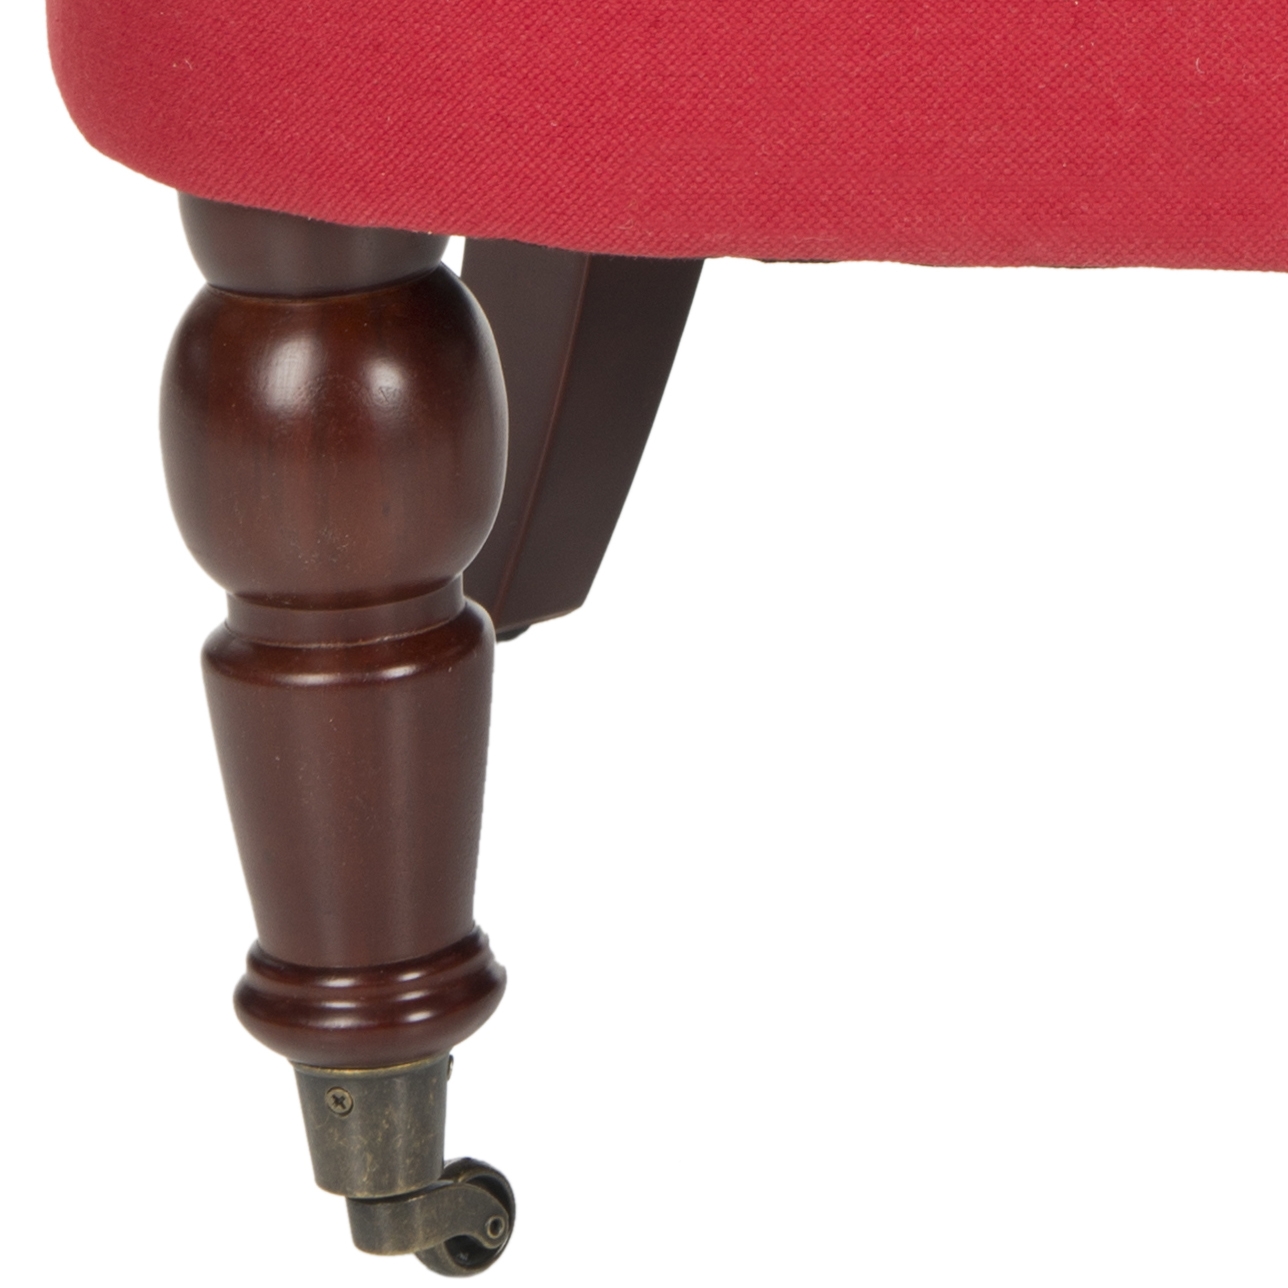 Carlin Tufted Chair - Cranberry/Cherry Mahogany - Arlo Home - Image 3